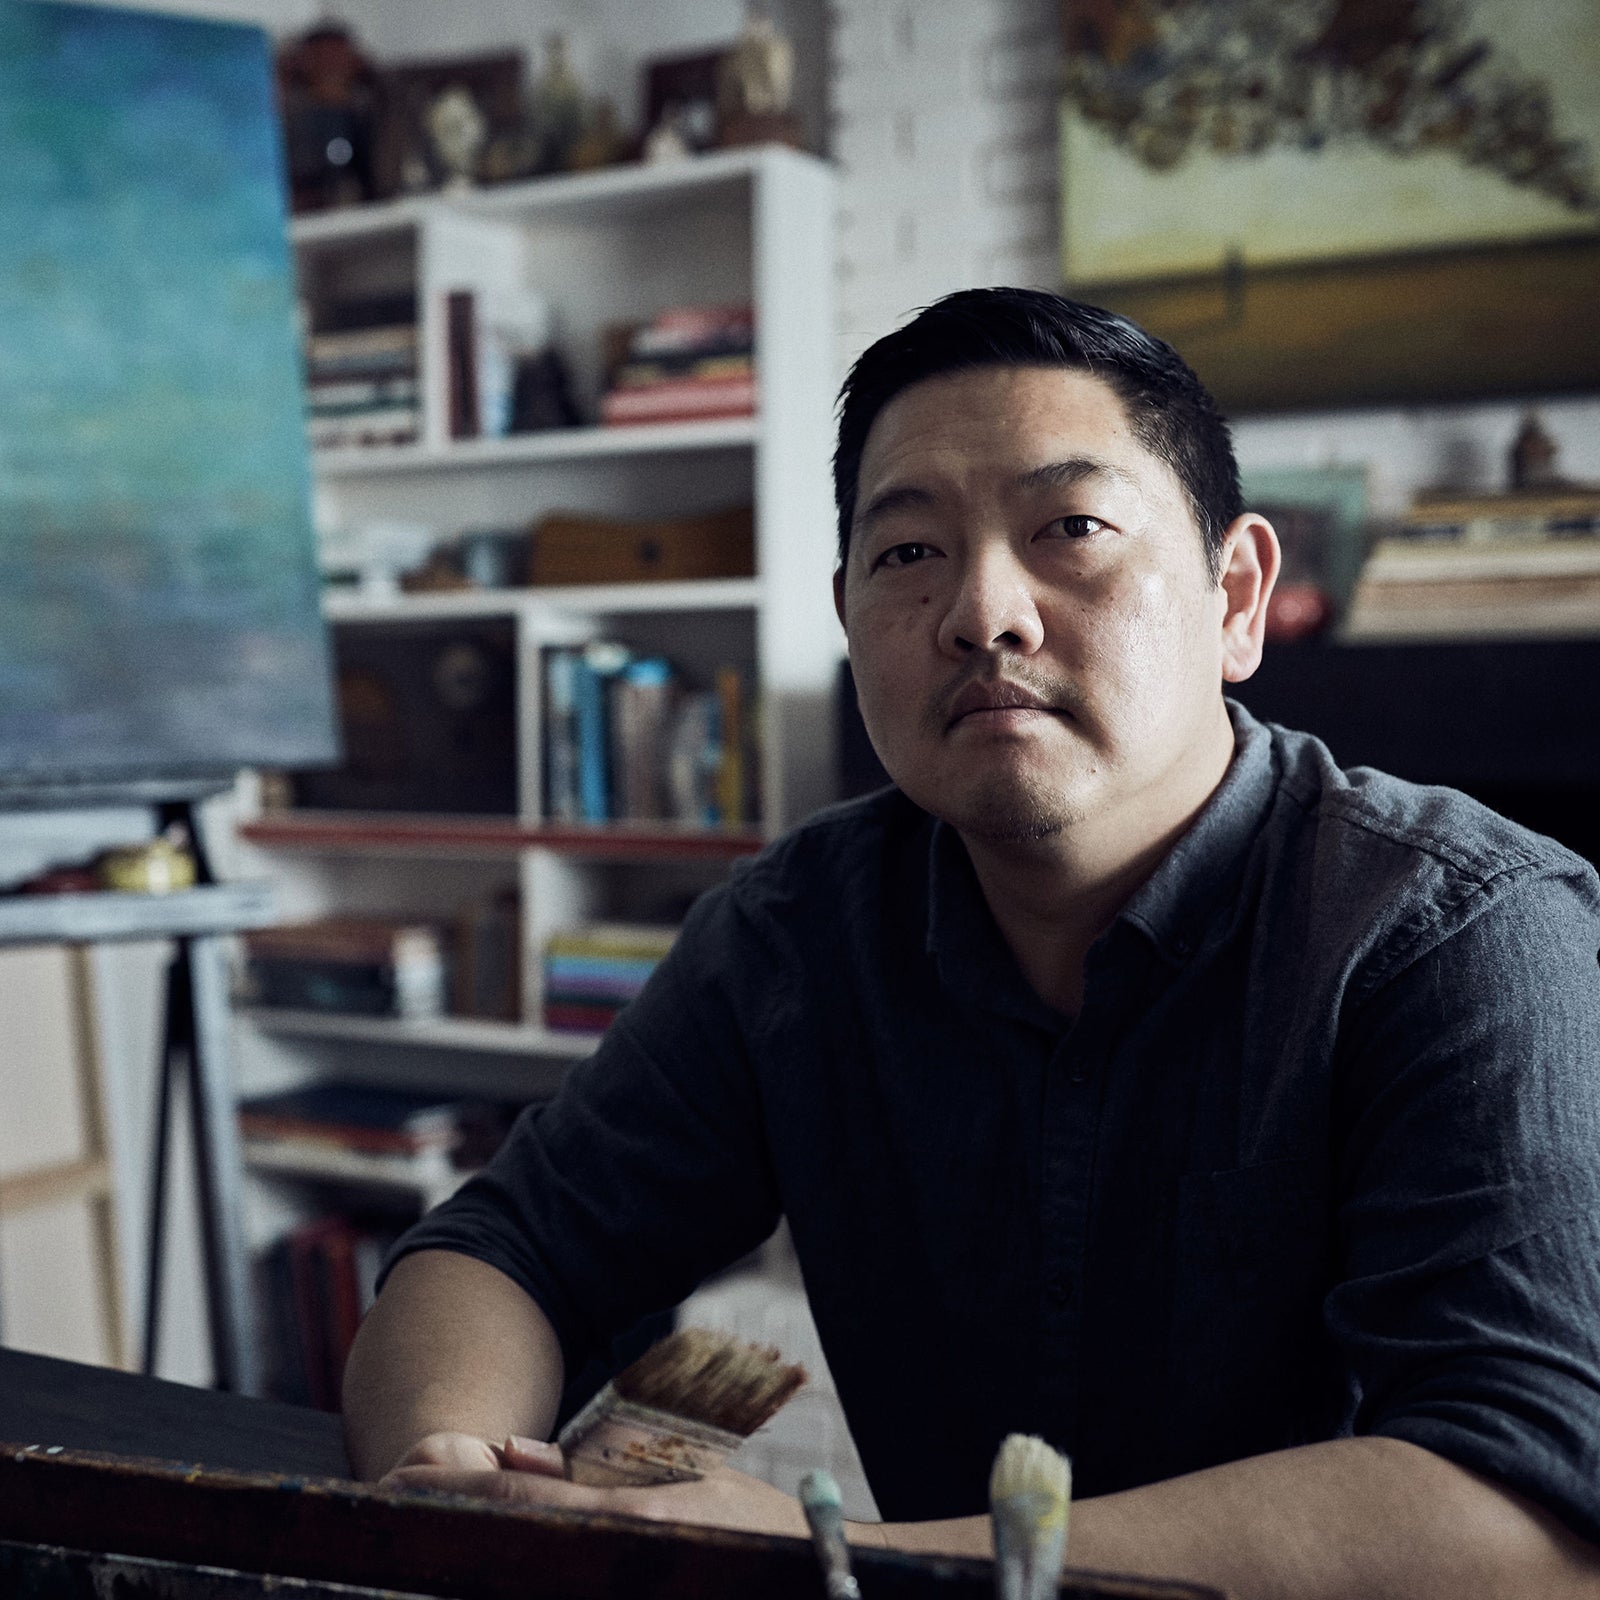 Charlotte NC based artist, and Lark + Key co-owner, Duy Huynh in his studio.